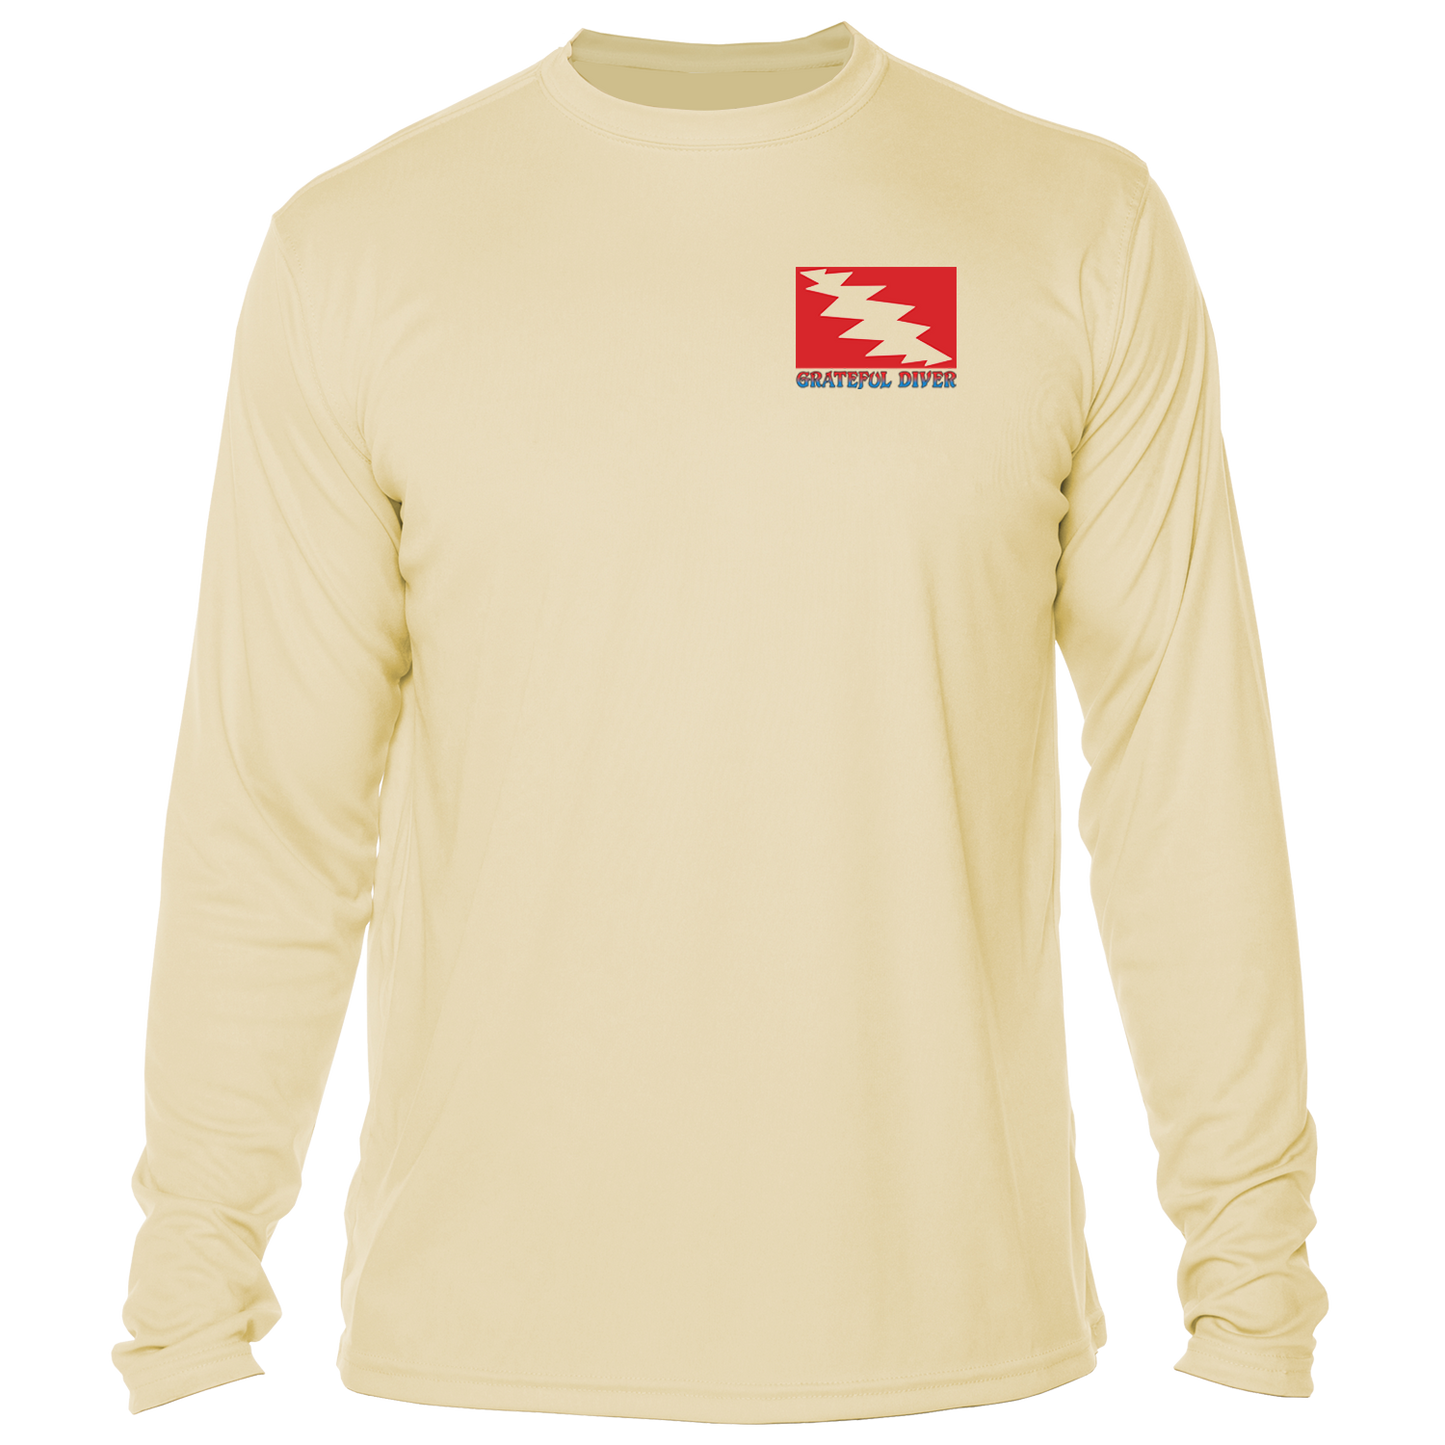 front of the Grateful Diver's Artist's Collection: Captain's Corner UV Shirt in pale yellow showing the classic dive flag logo